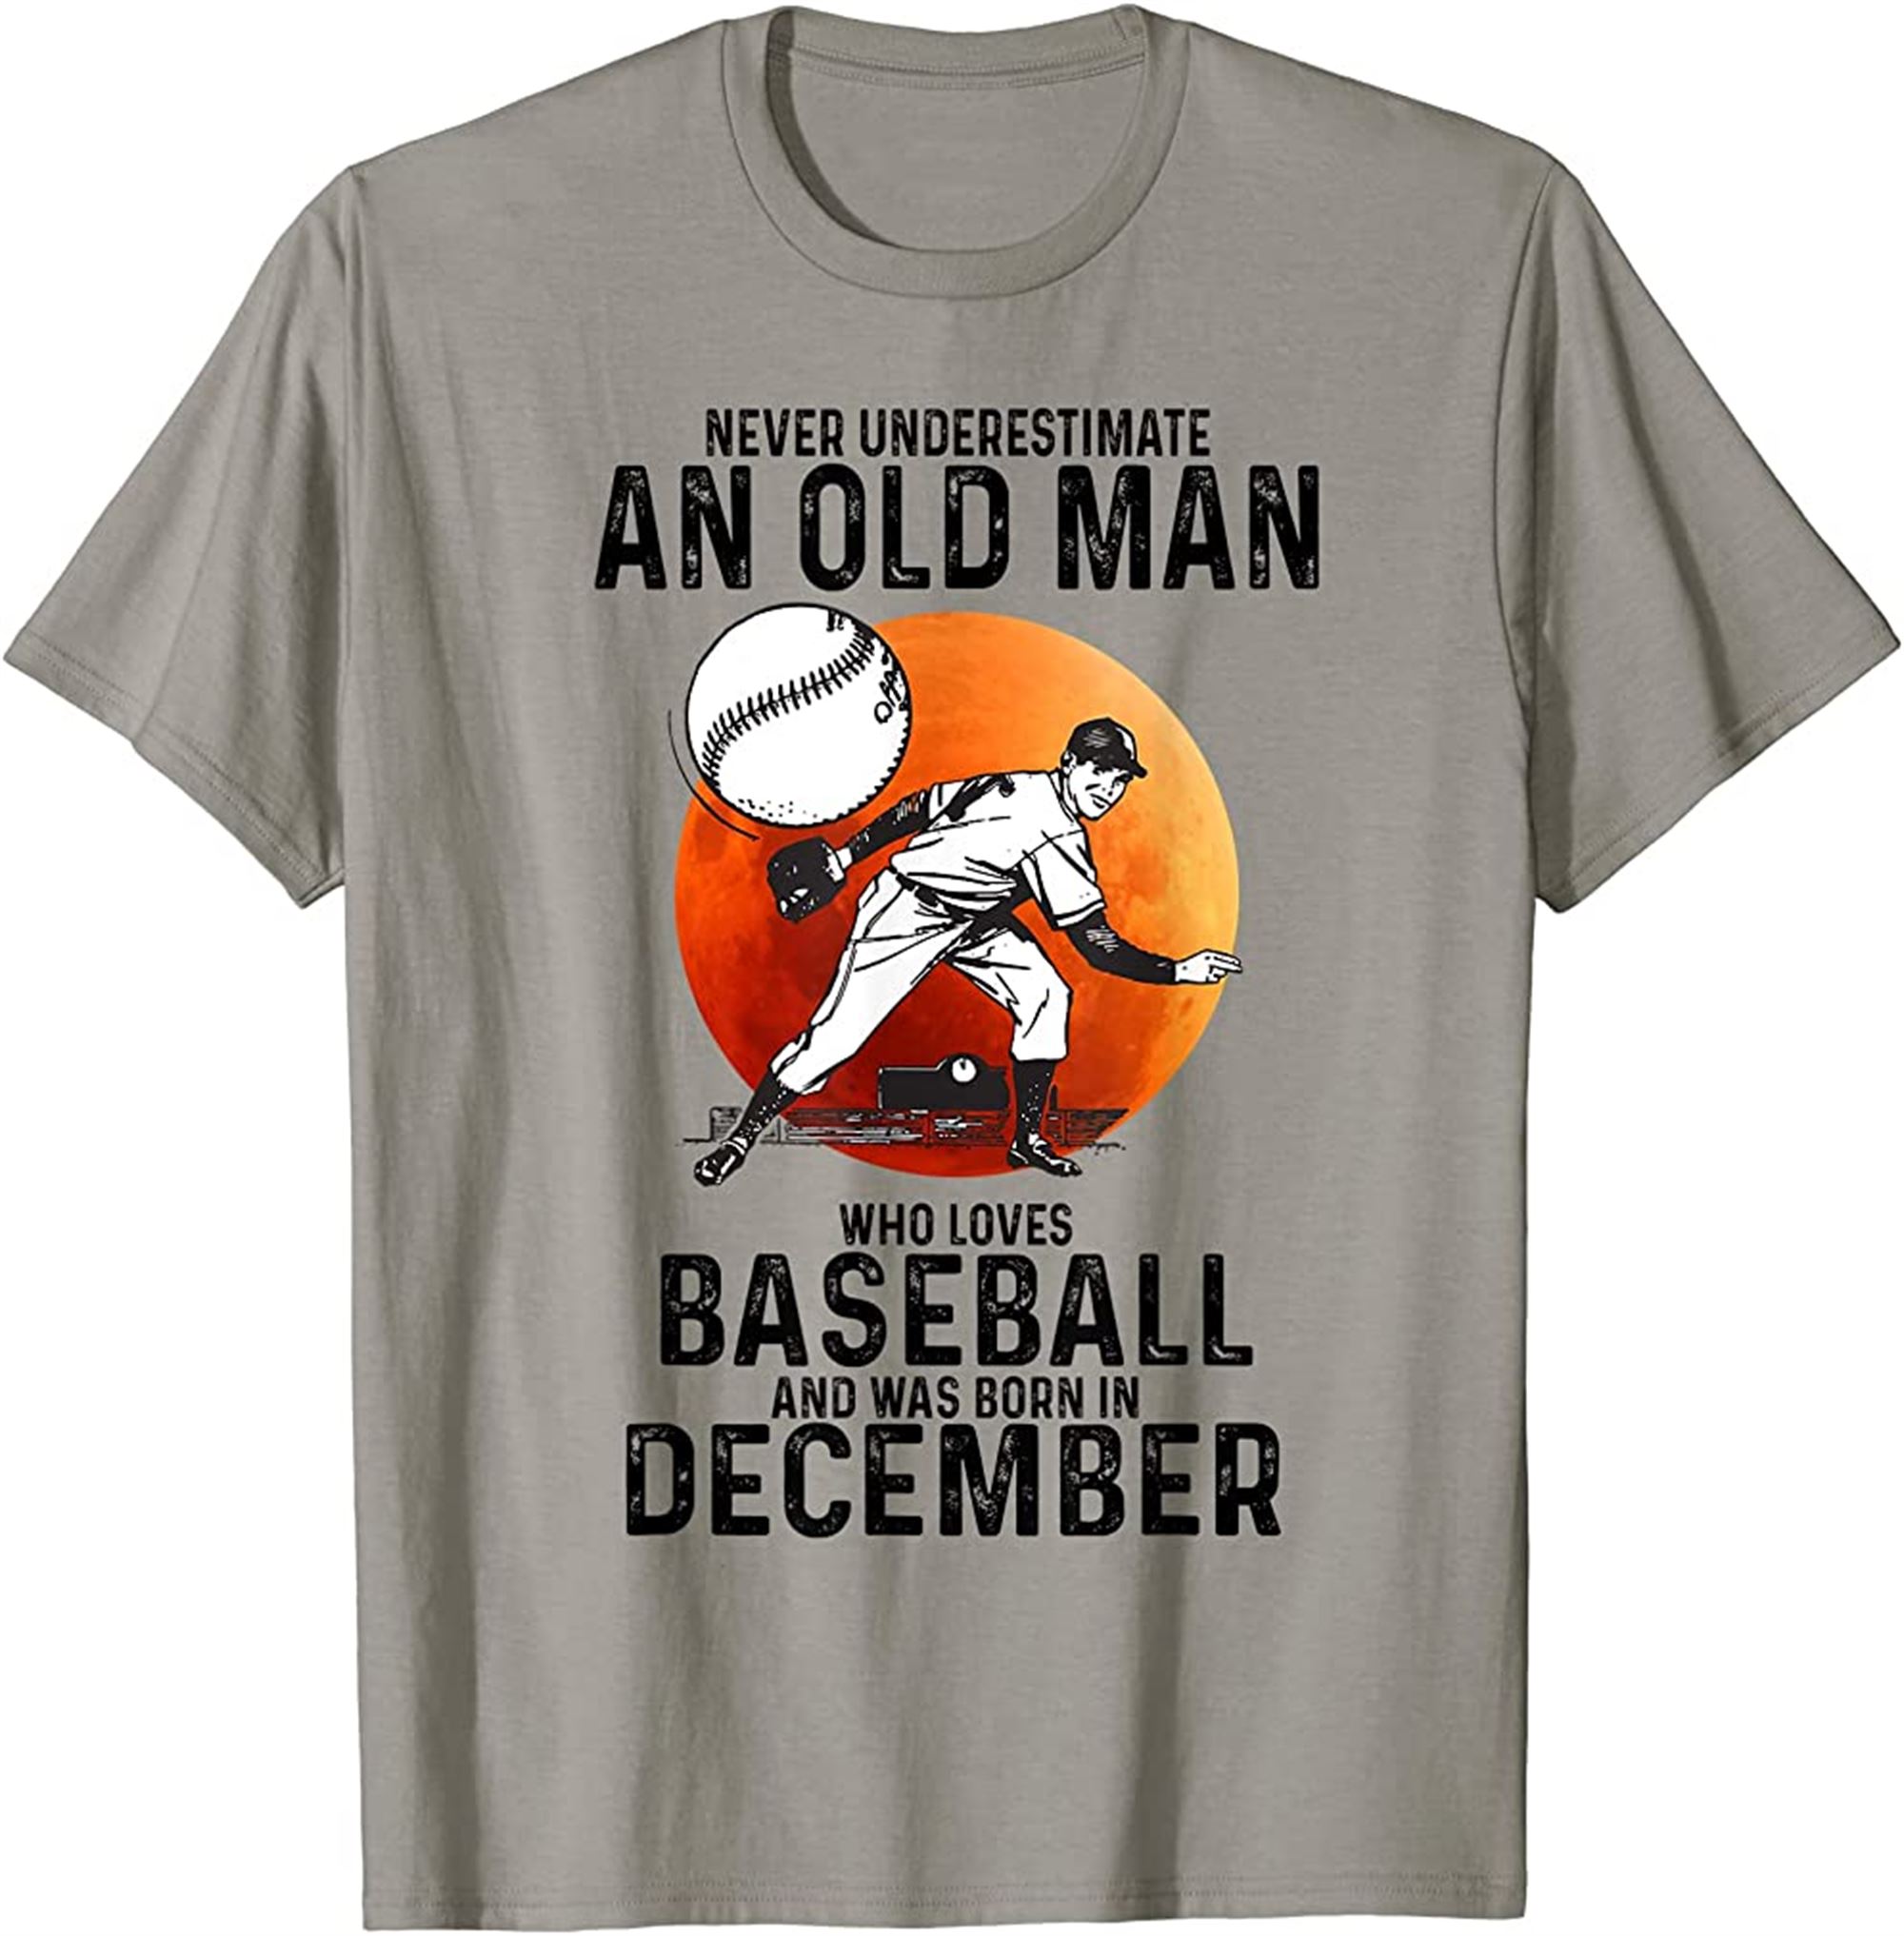 Never Underestimate An Old Man Who Loves Baseball December T-shirt Full Size Up To 5xl